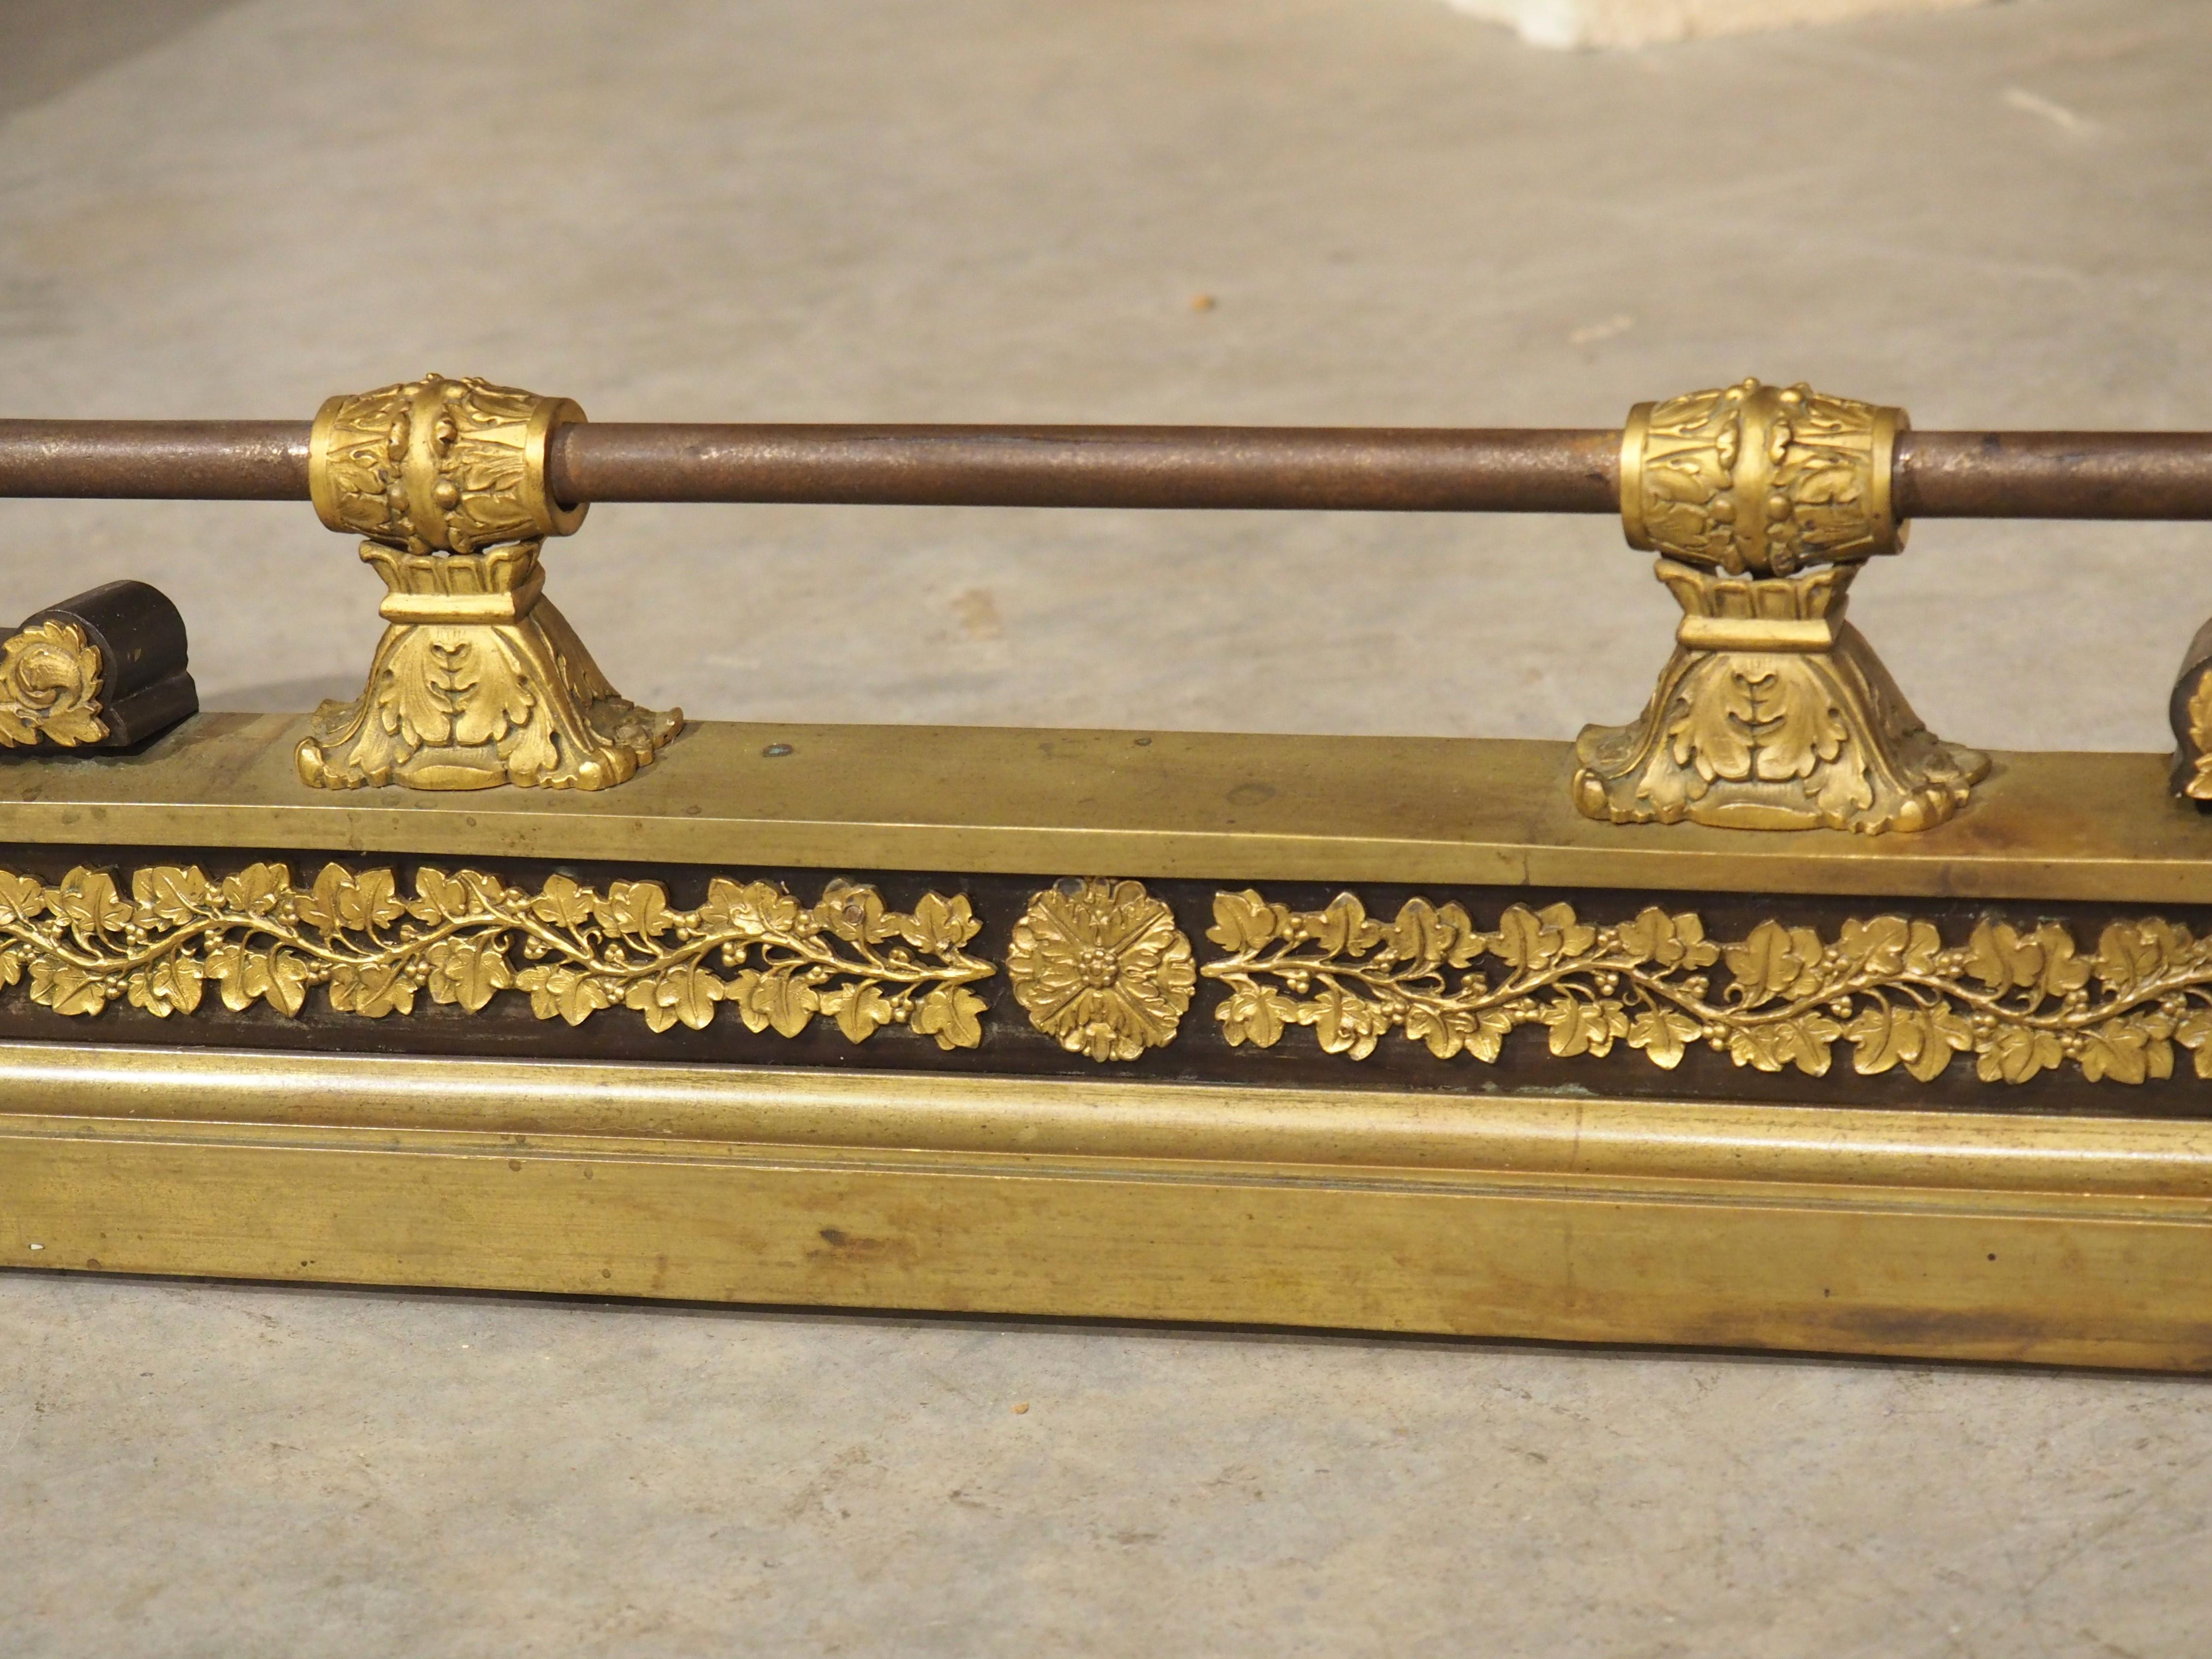 Period French Empire Patinated and Gilt Bronze Fireplace Fender, Circa 1815 For Sale 10